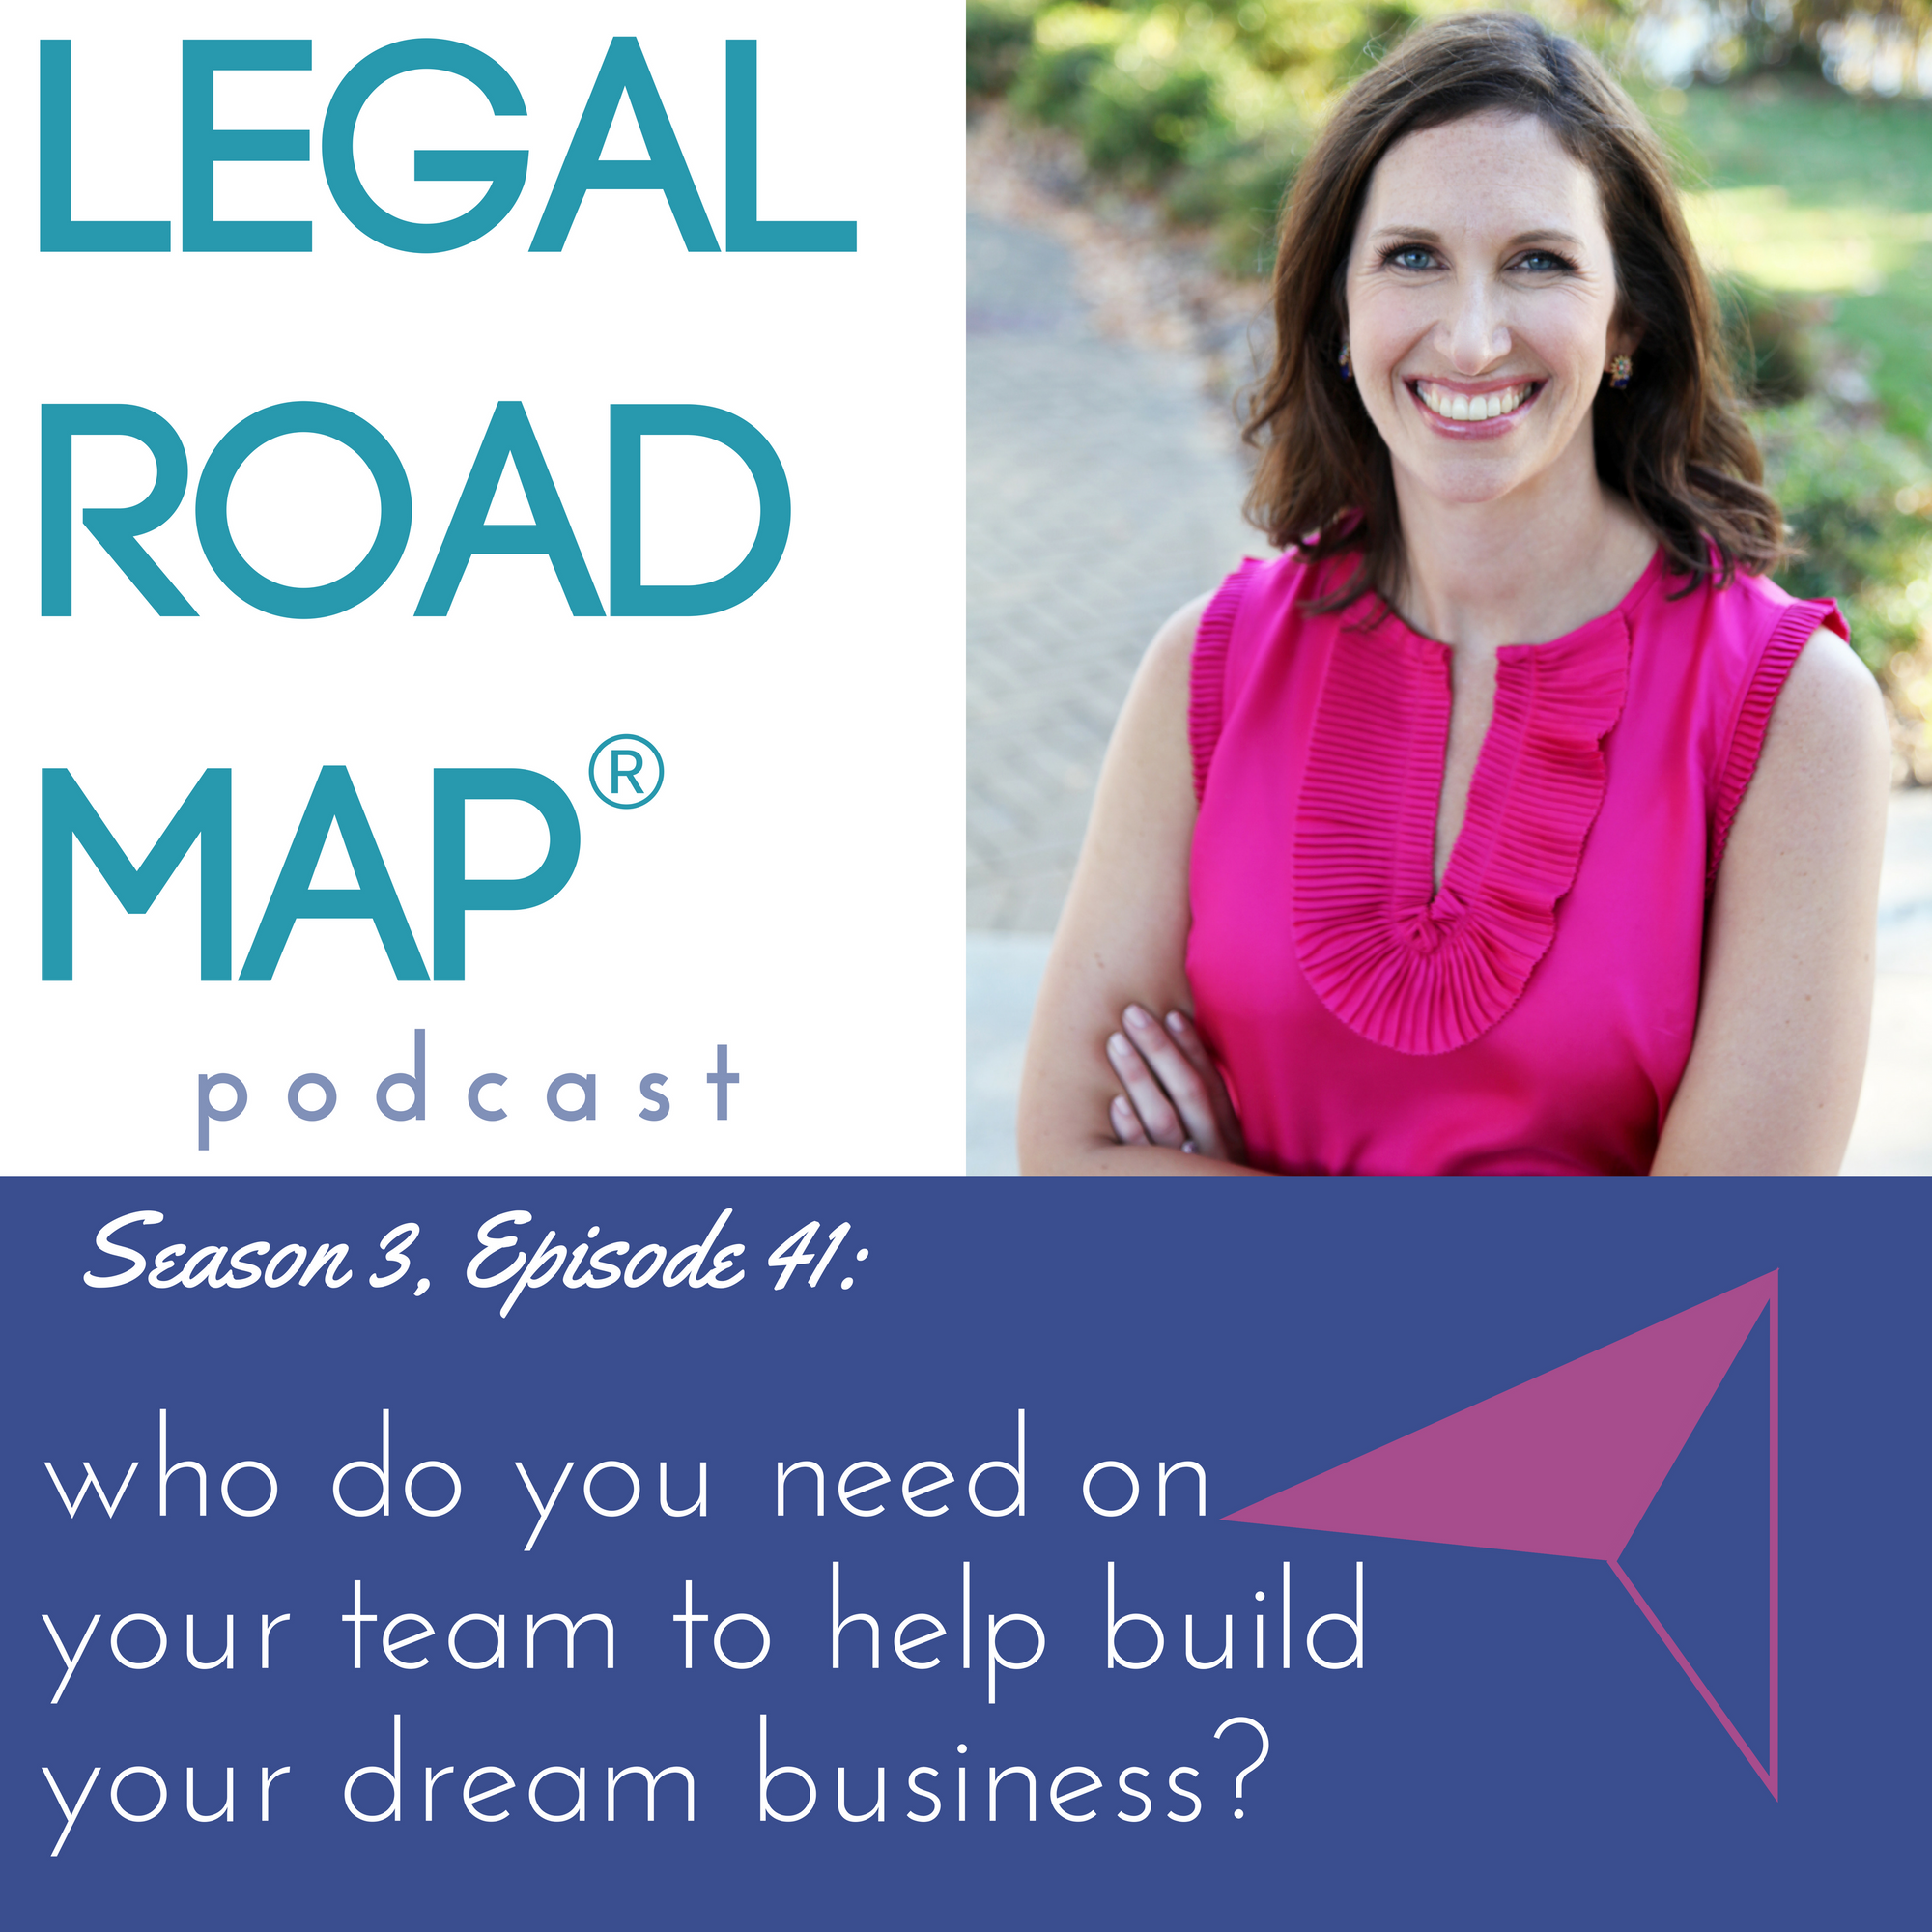 What advisors do 7-figure businesses have on their team, and who do you need to help build your dream business? (Legal Road Map® Podcast S3E41)